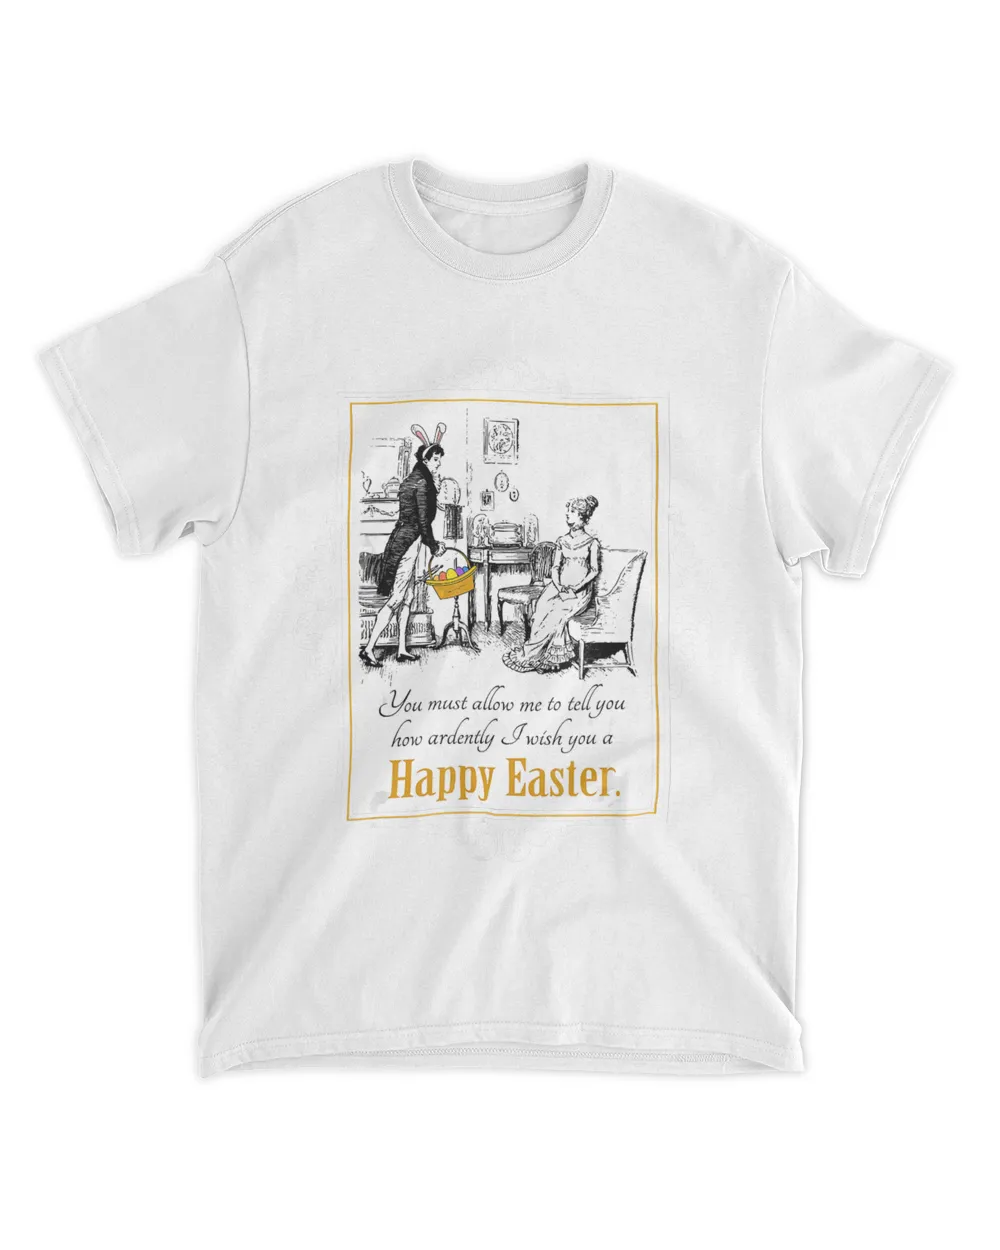 Jane Austen Pride and Prejudice Easter Gifts for Women Book T Shirt